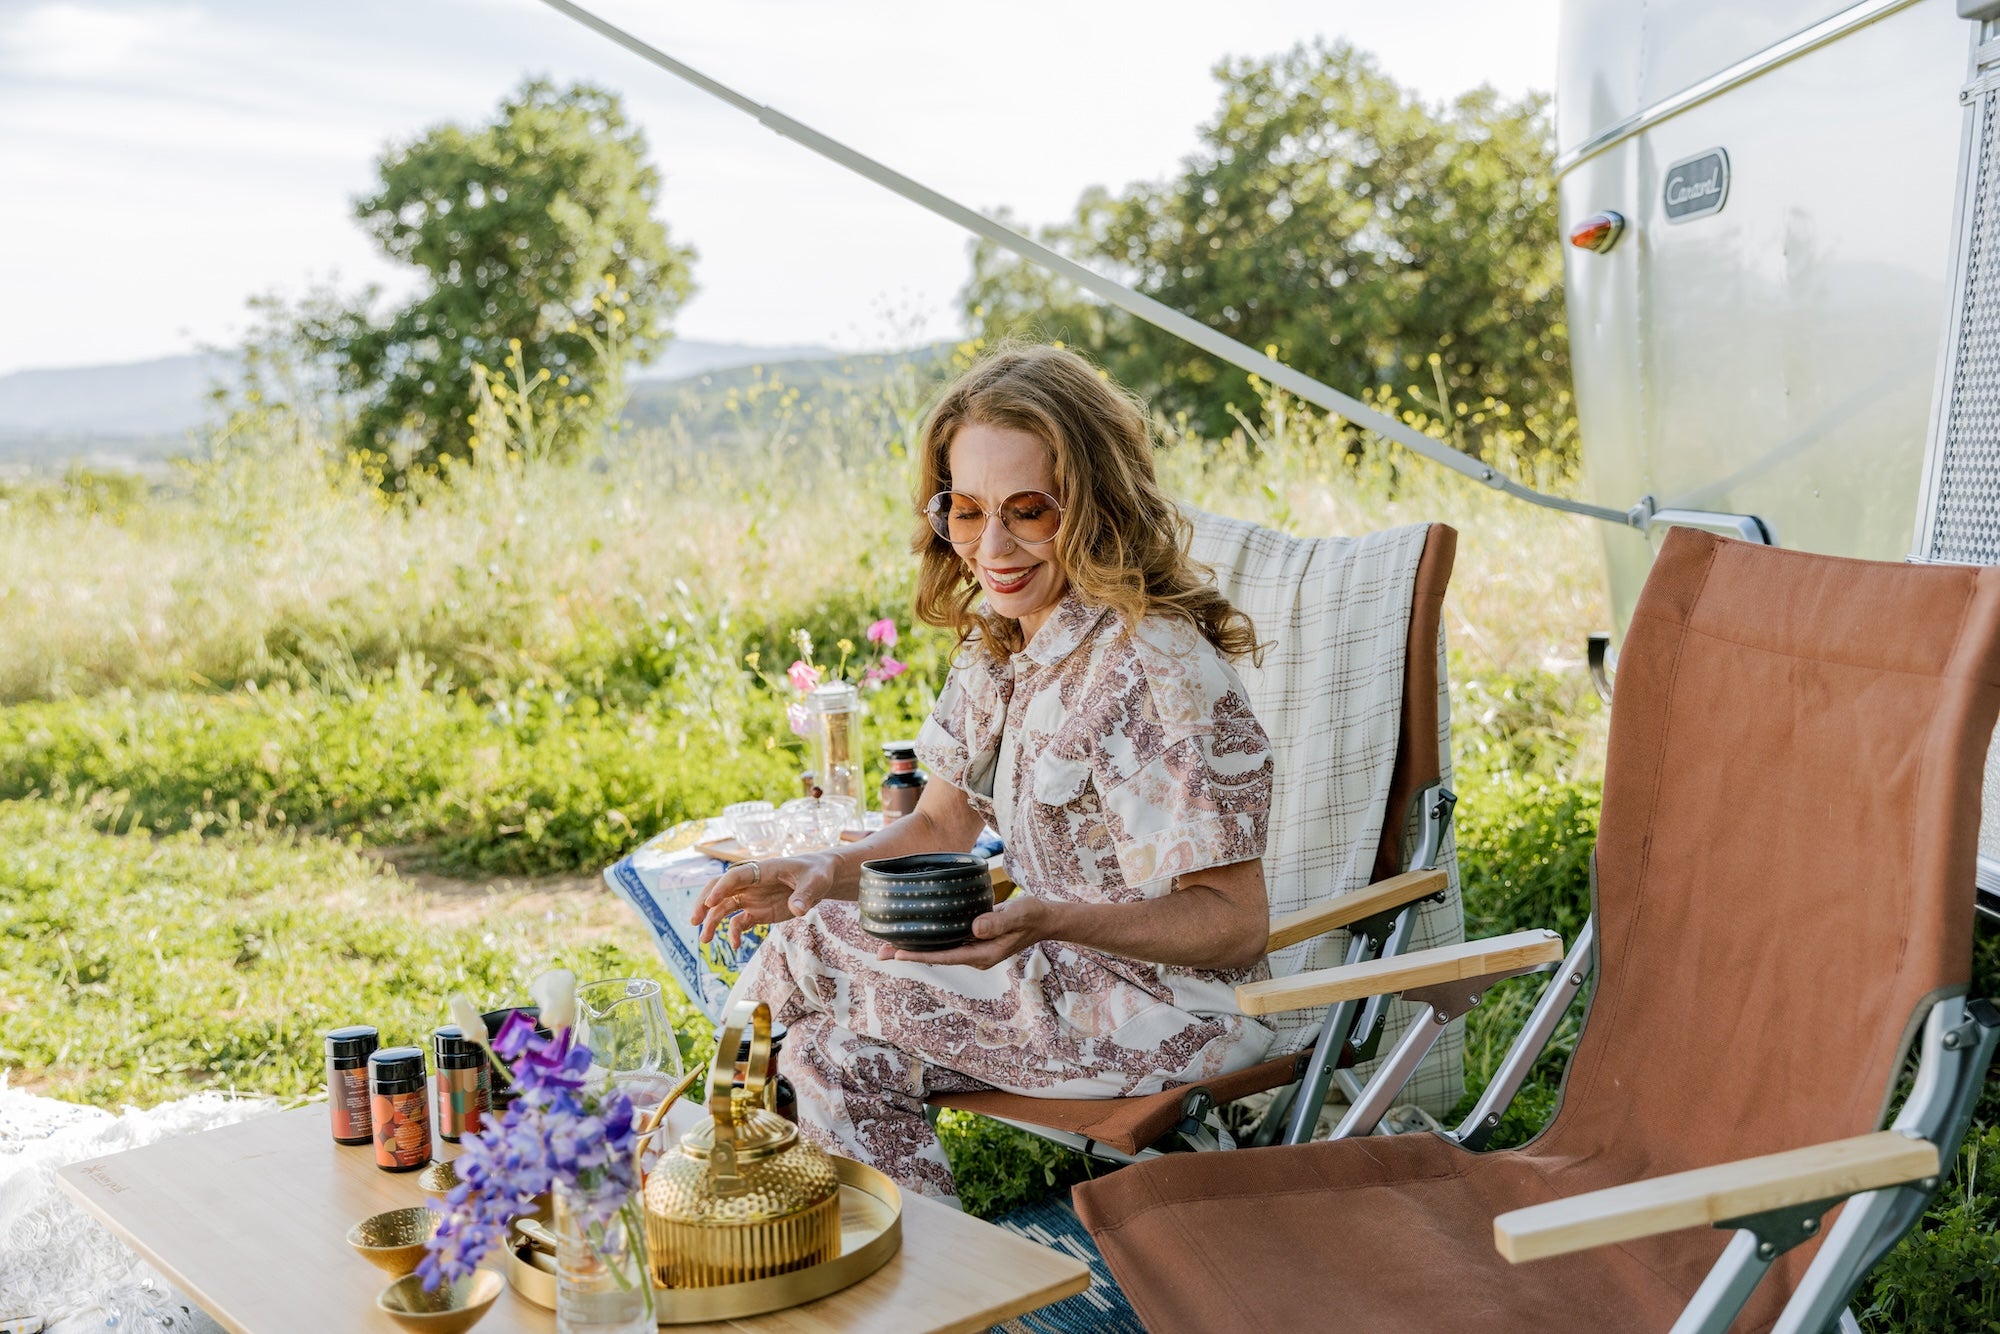 A woman with long hair and sunglasses, wearing a patterned dress, is sitting on a chair next to a table with various items outdoors. She is holding a small bowl. Behind her, there is an Airstream trailer and lush greenery under a clear sky.